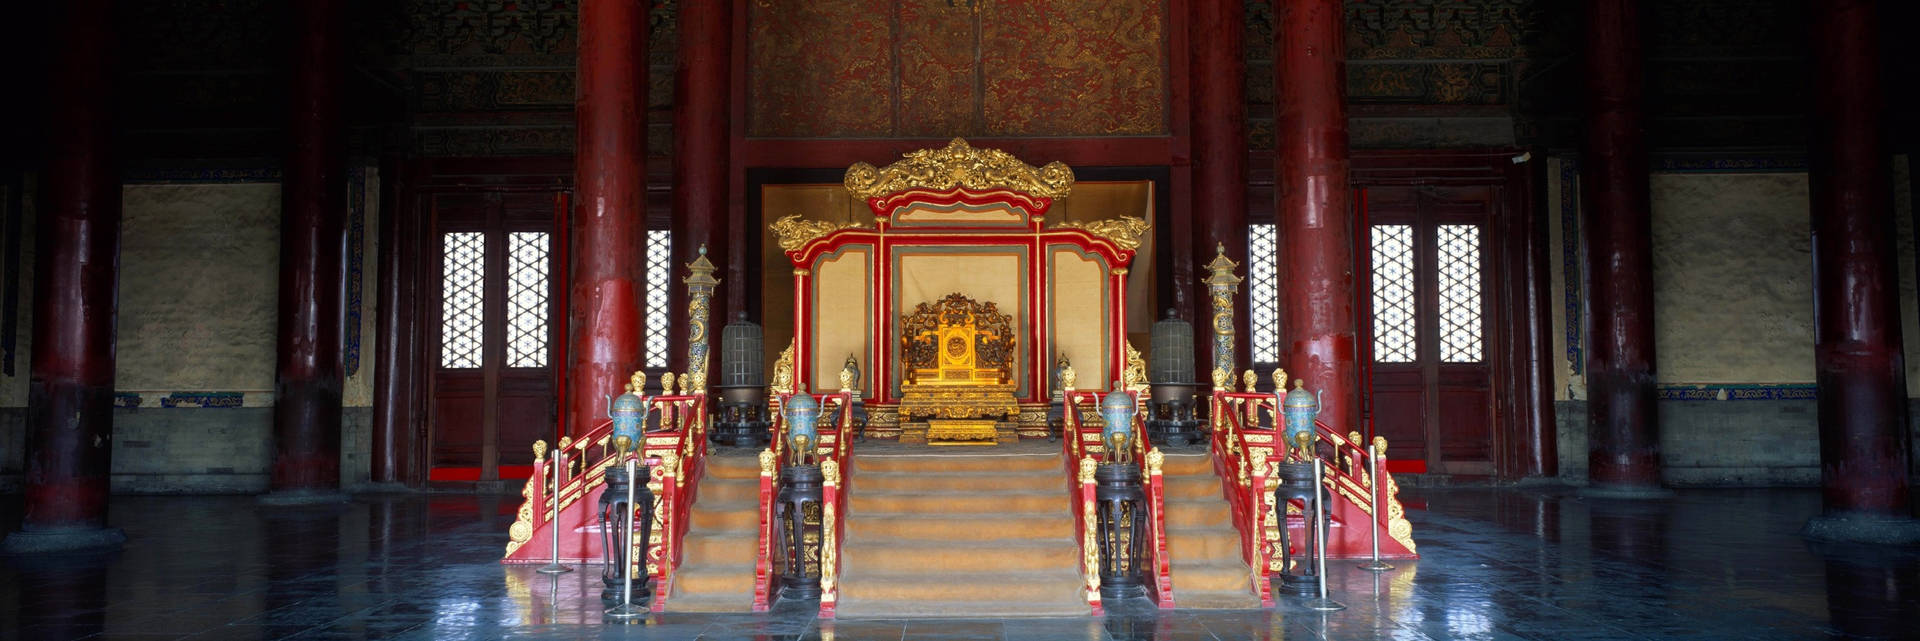 Chinese Kings Throne Hall Forbidden City Wallpaper